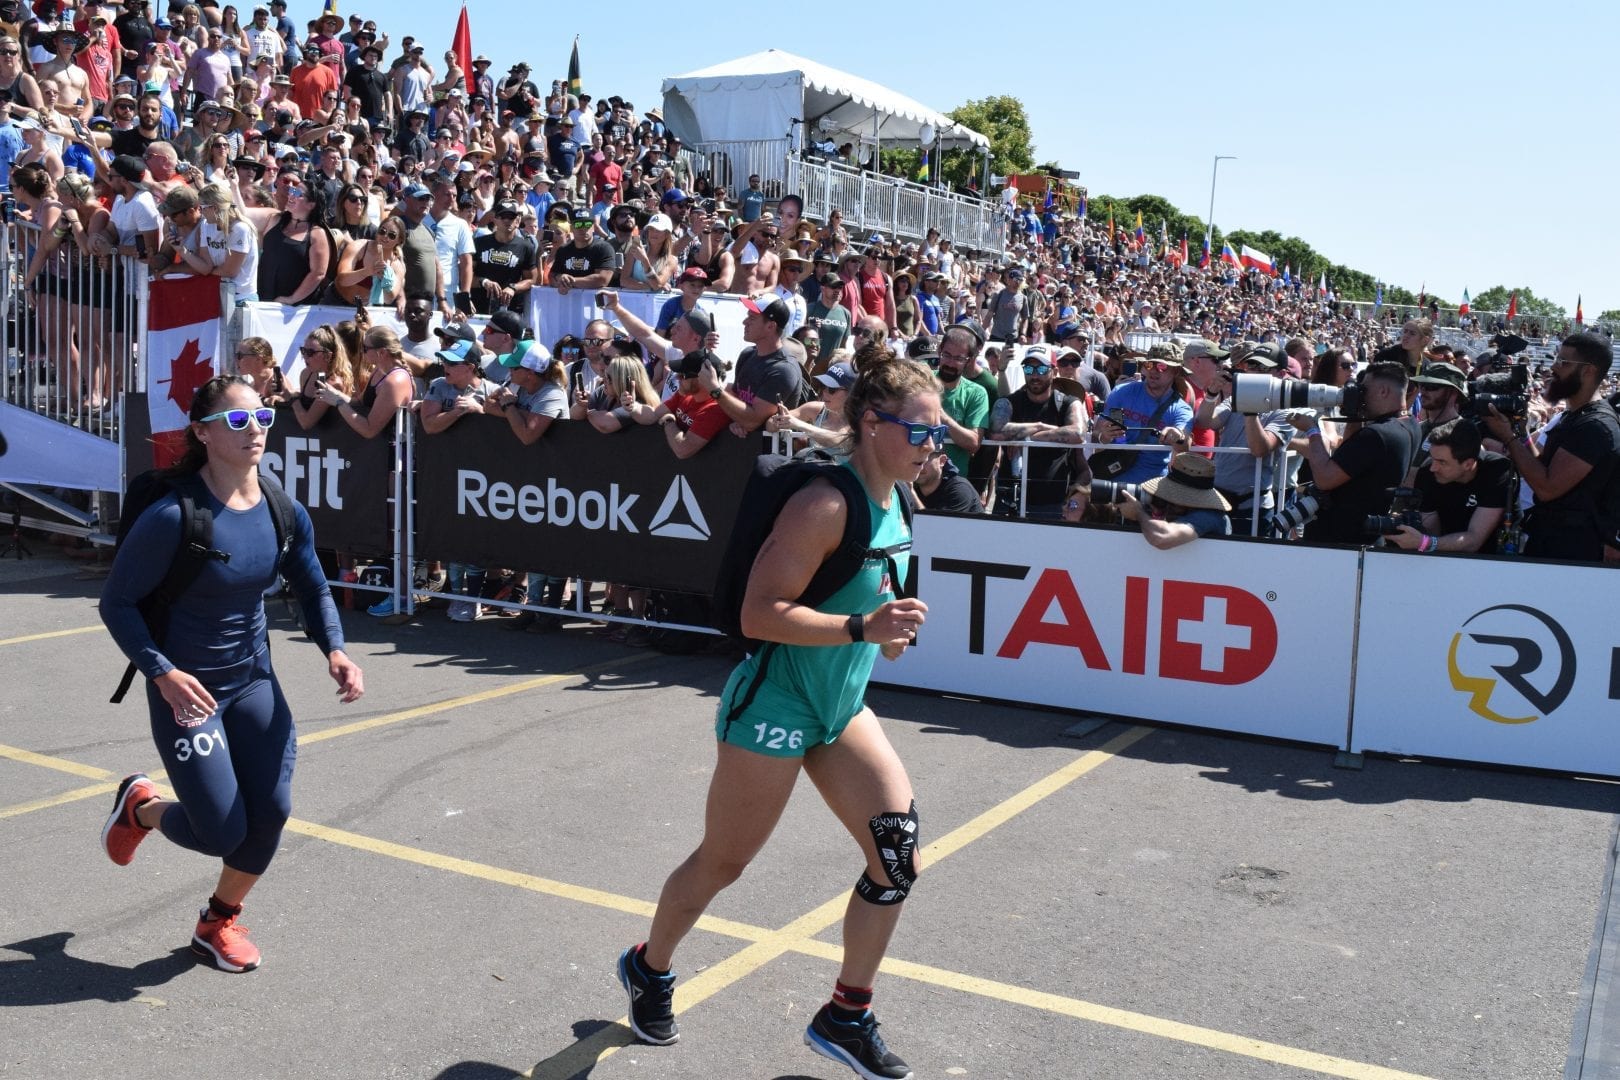 Carol-Ann Reason-Thibault completes the Ruck Run event of the 2019 CrossFit Games.